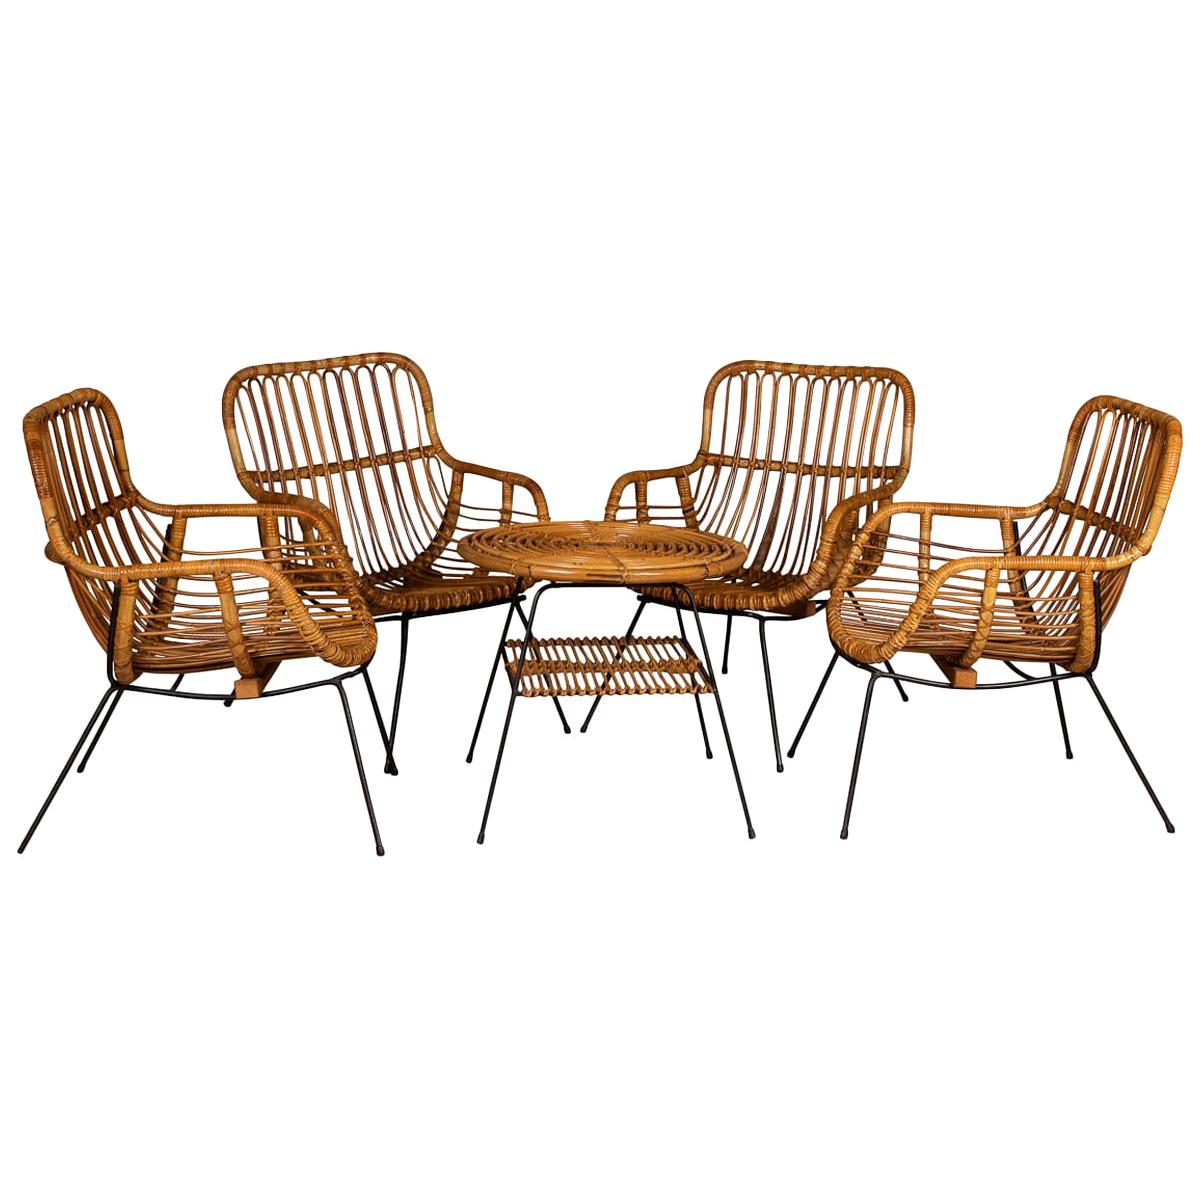 20th Century Italian Set of Four Bamboo Chairs and Table, Milan